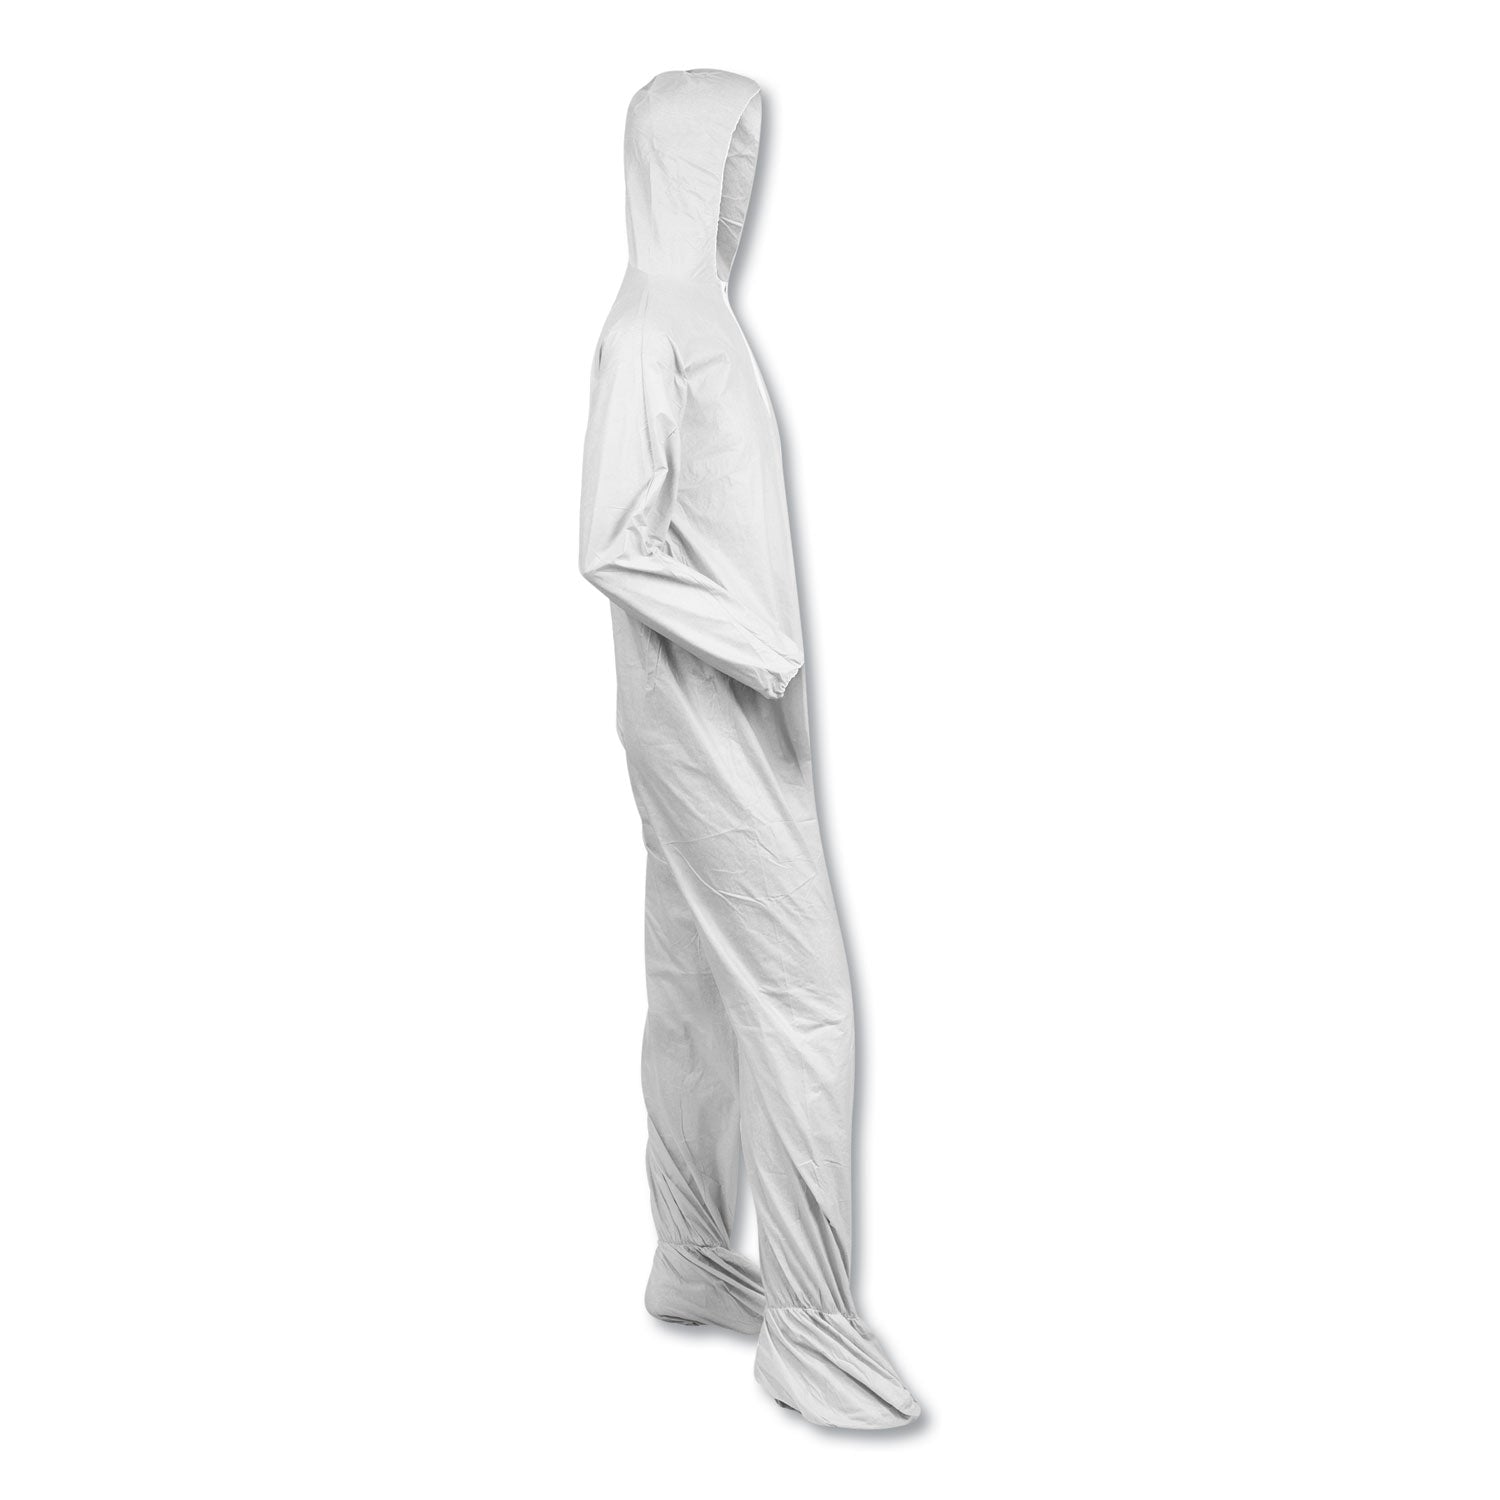 a40-elastic-cuff-ankle-hood-and-boot-coveralls-4x-large-white-25-carton_kcc44337 - 5